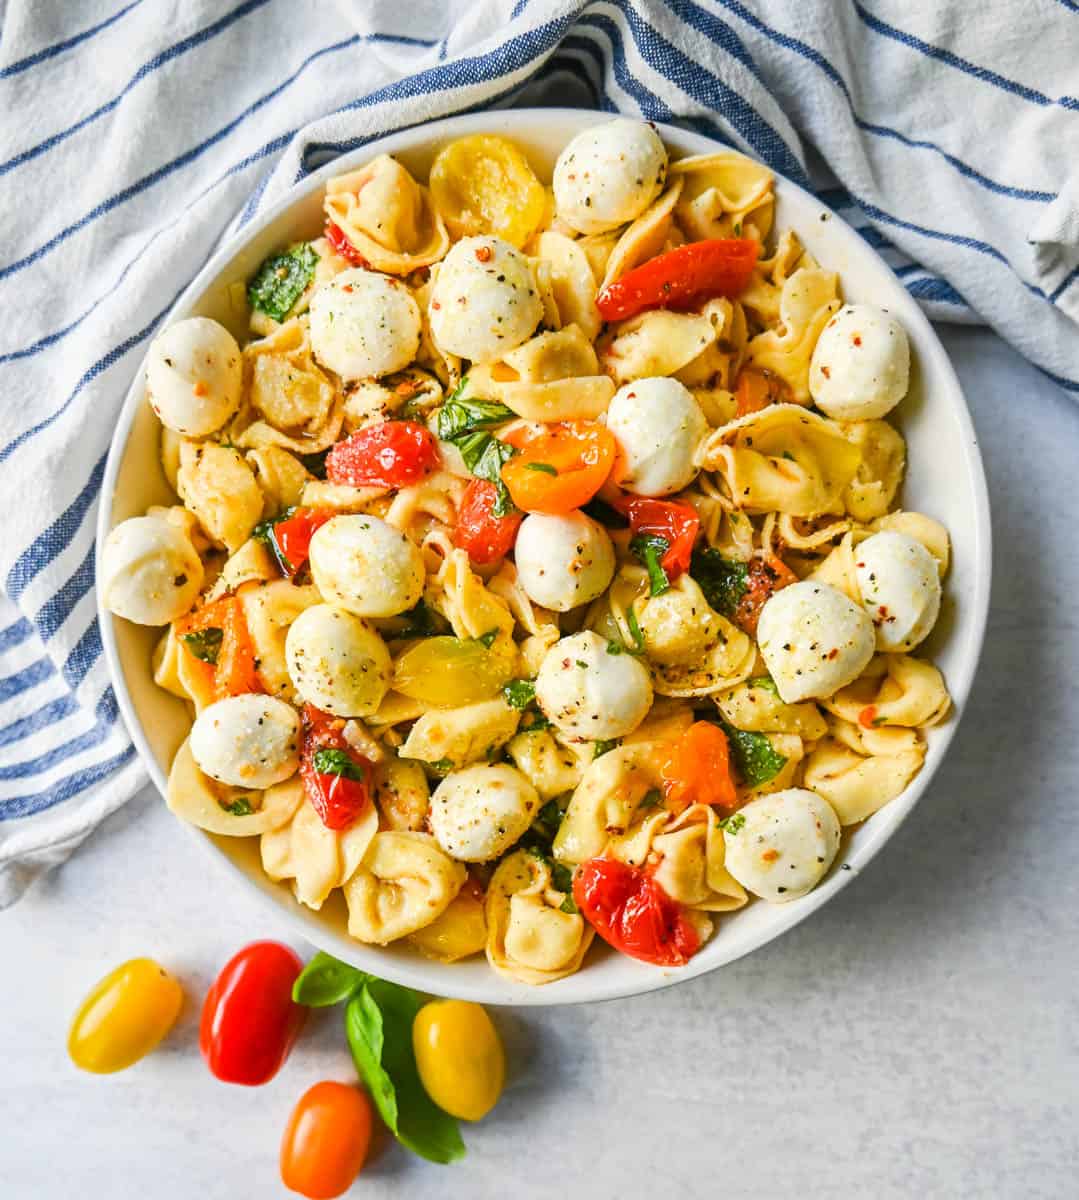 This Caprese Tortellini is made with cheese Tortellini tossed with sauteed garlic and tomatoes in extra virgin olive oil, fresh basil, and fresh mozzarella and spices. This fresh tortellini caprese pasta is perfect for summer!